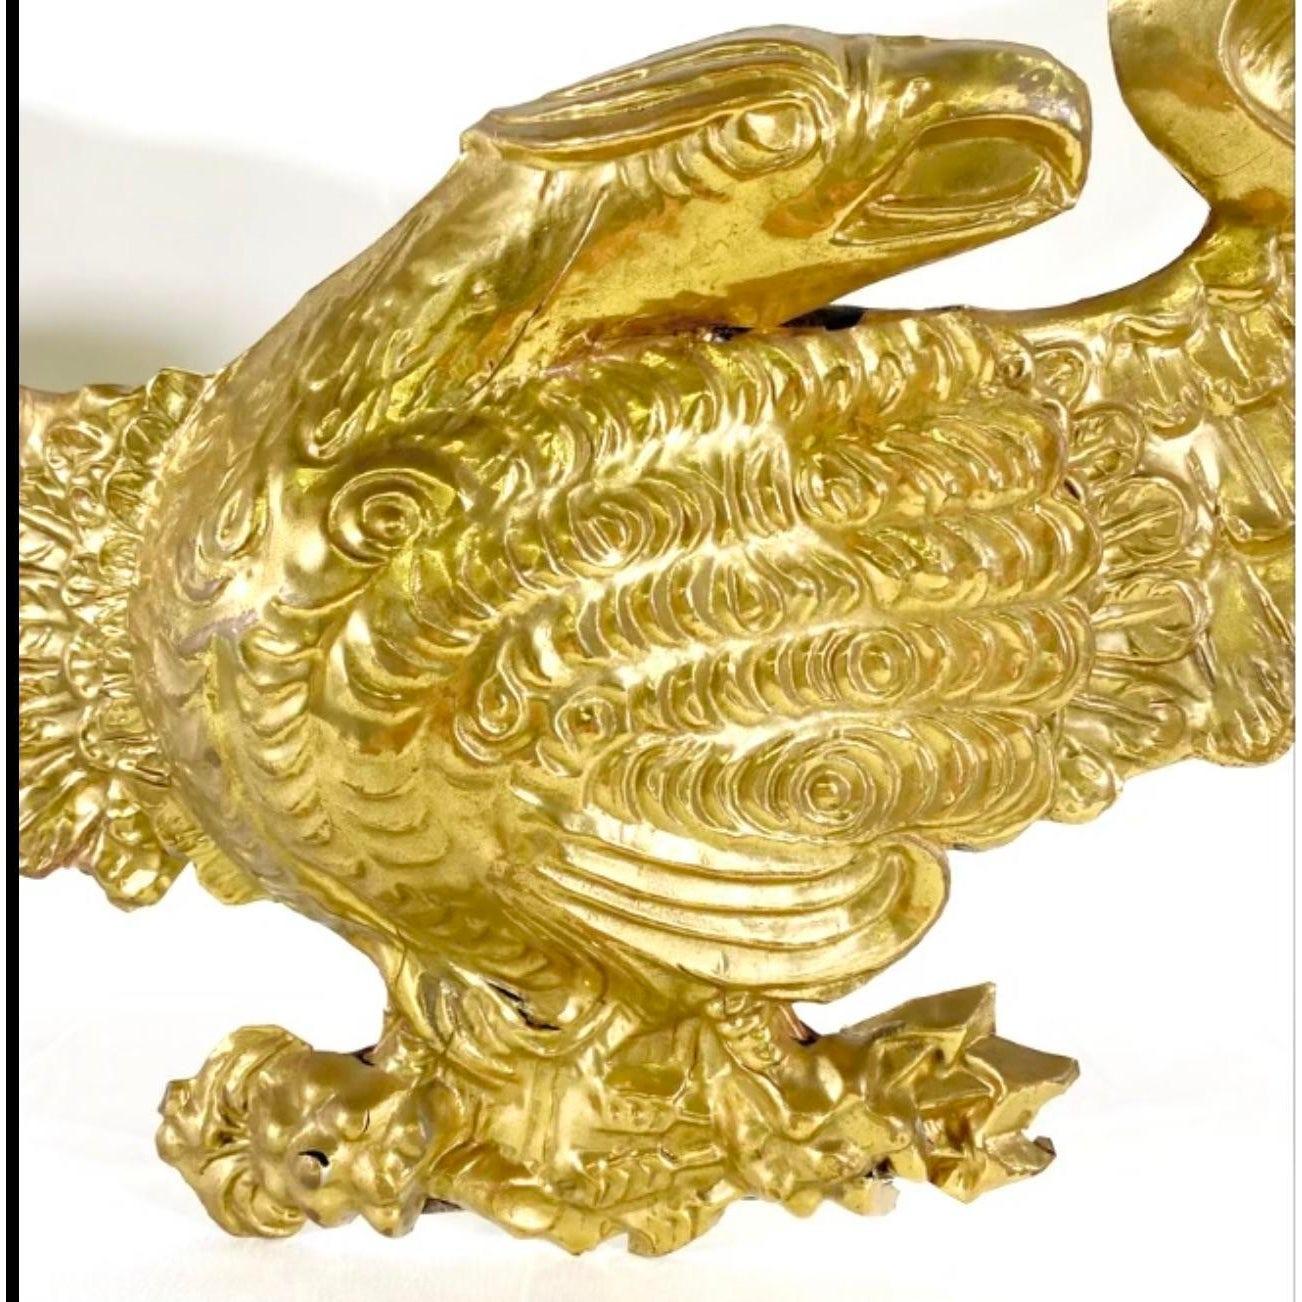 A stunning vintage early 20th century repousse American eagle. The eagle is made of hollow brass. The eagles feet are clasping arrows. Acquired at a Palm Beach estate.